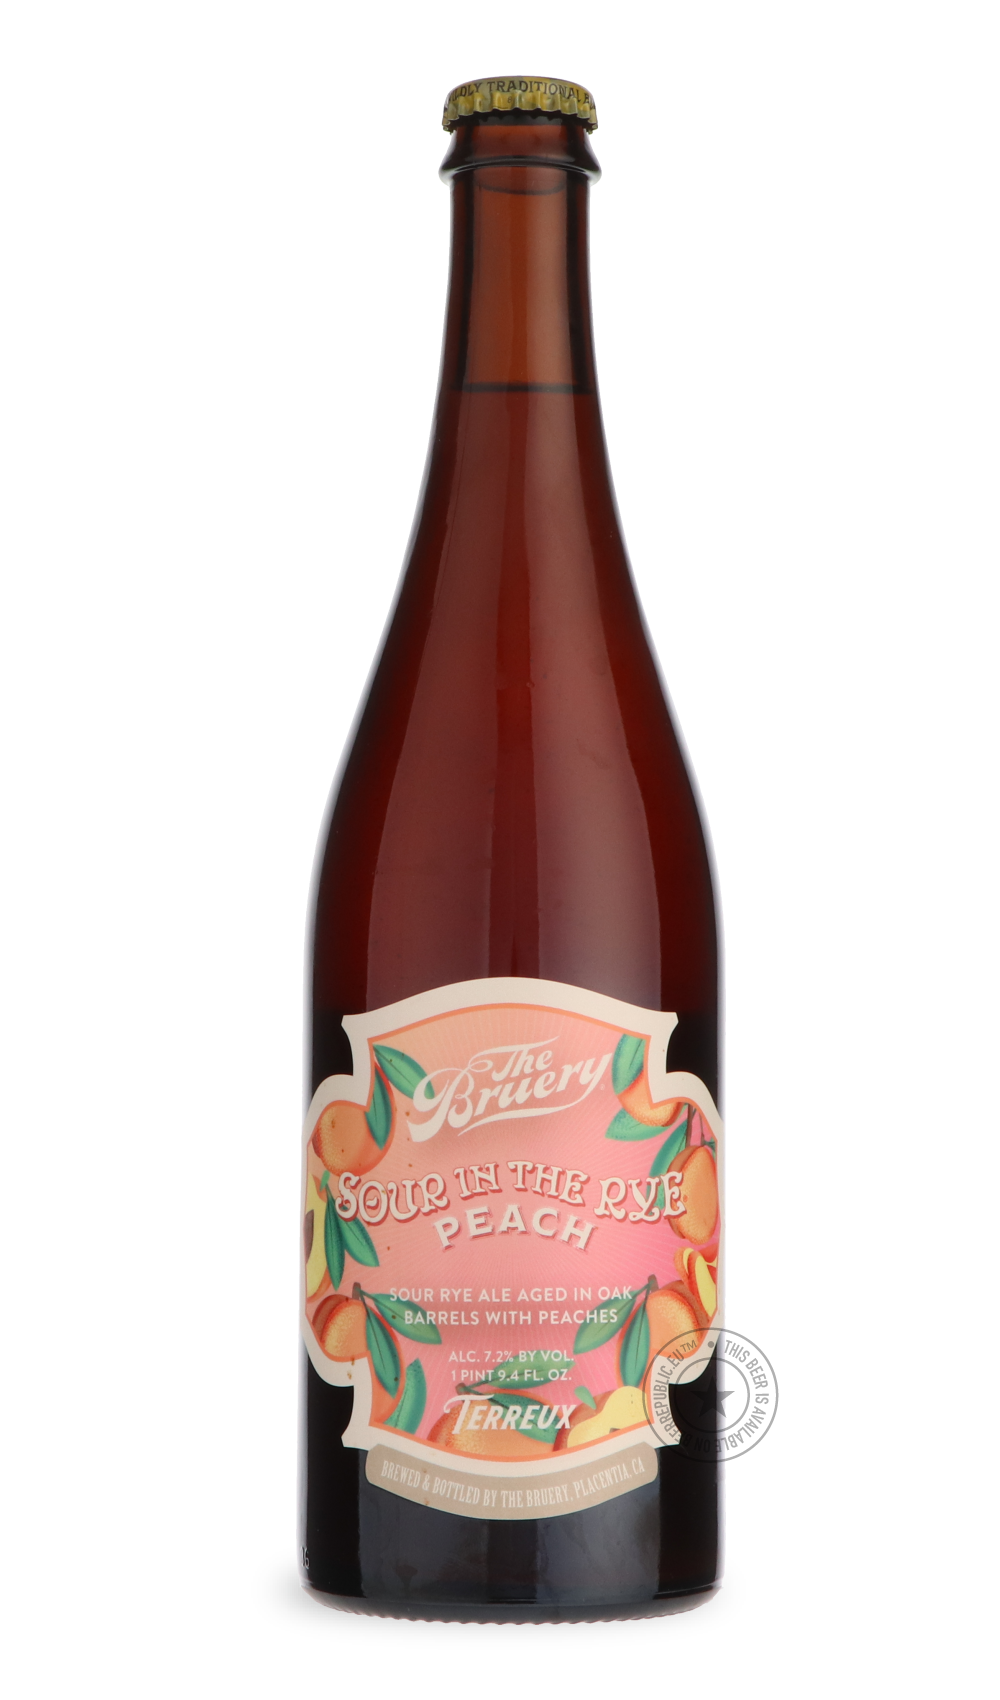 -The Bruery- Terreux Sour In the Rye With Peaches-Sour / Wild & Fruity- Only @ Beer Republic - The best online beer store for American & Canadian craft beer - Buy beer online from the USA and Canada - Bier online kopen - Amerikaans bier kopen - Craft beer store - Craft beer kopen - Amerikanisch bier kaufen - Bier online kaufen - Acheter biere online - IPA - Stout - Porter - New England IPA - Hazy IPA - Imperial Stout - Barrel Aged - Barrel Aged Imperial Stout - Brown - Dark beer - Blond - Blonde - Pilsner -